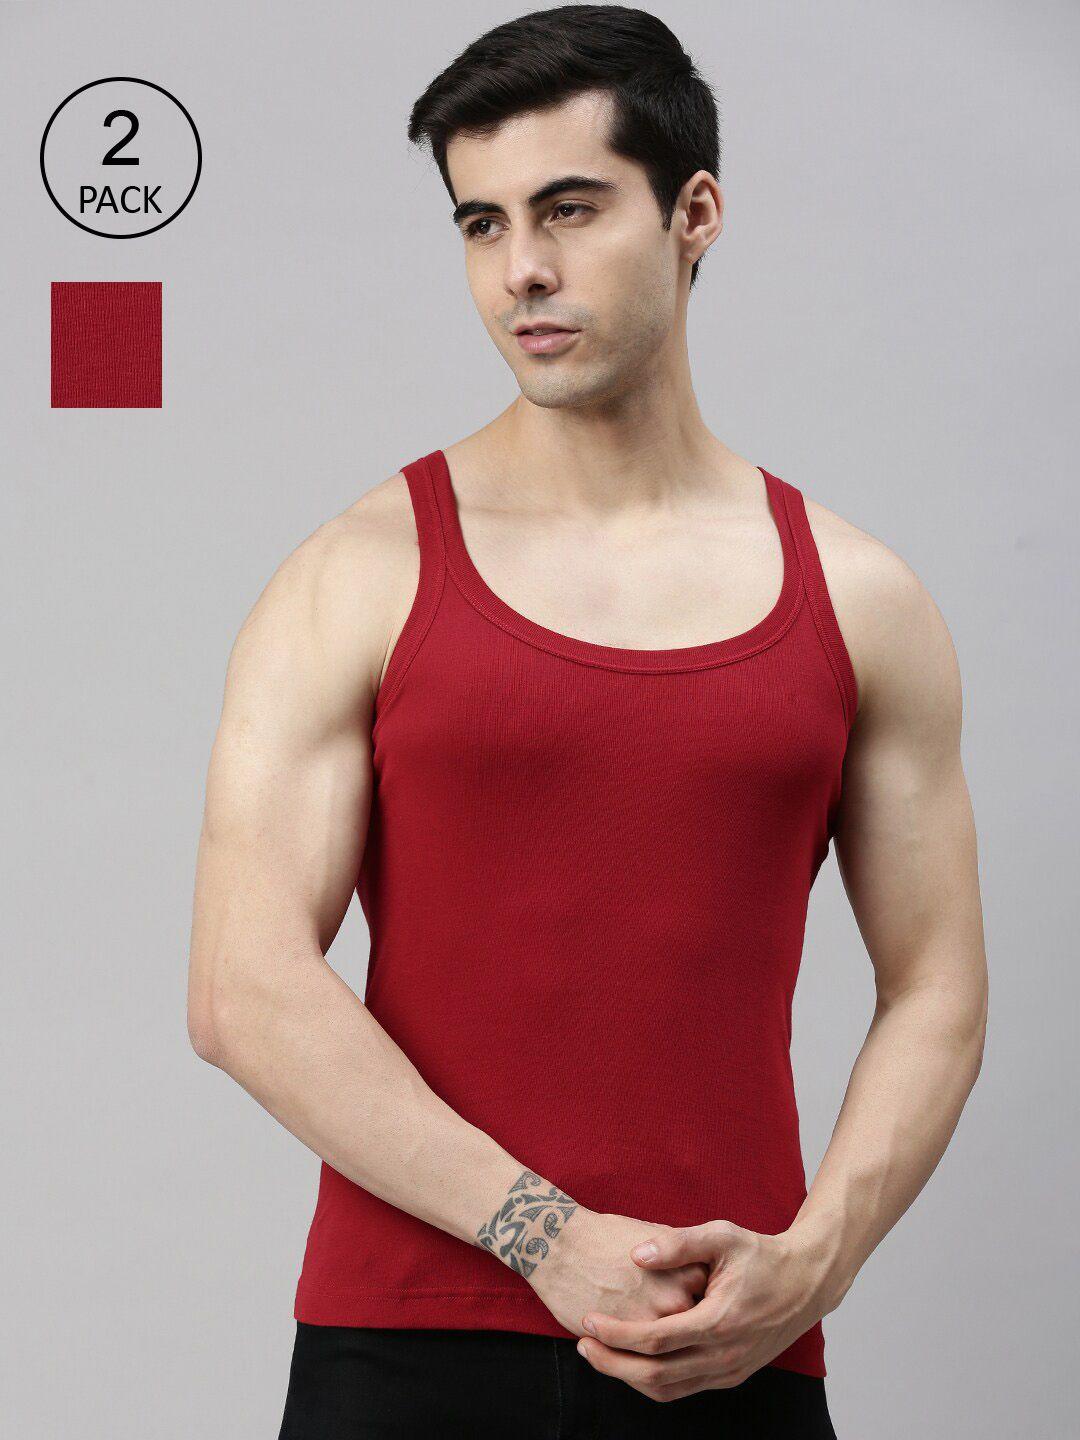 lux-cozi-men-pack-of-2-solid-organic-cotton-innerwear-vests